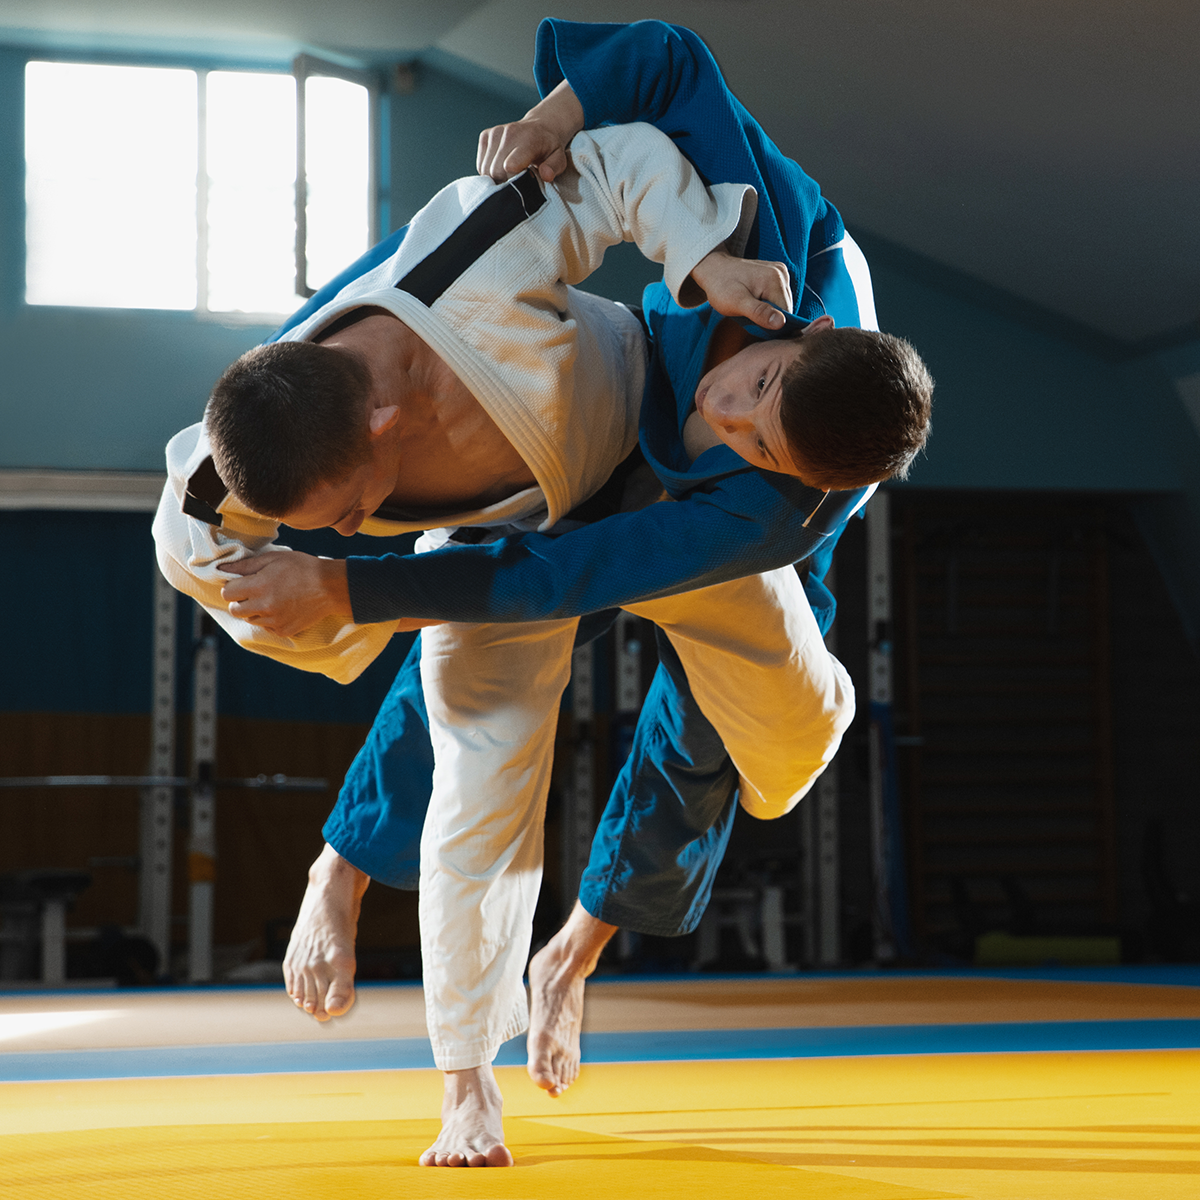 Two men are practicing judo on a mat in a gym.